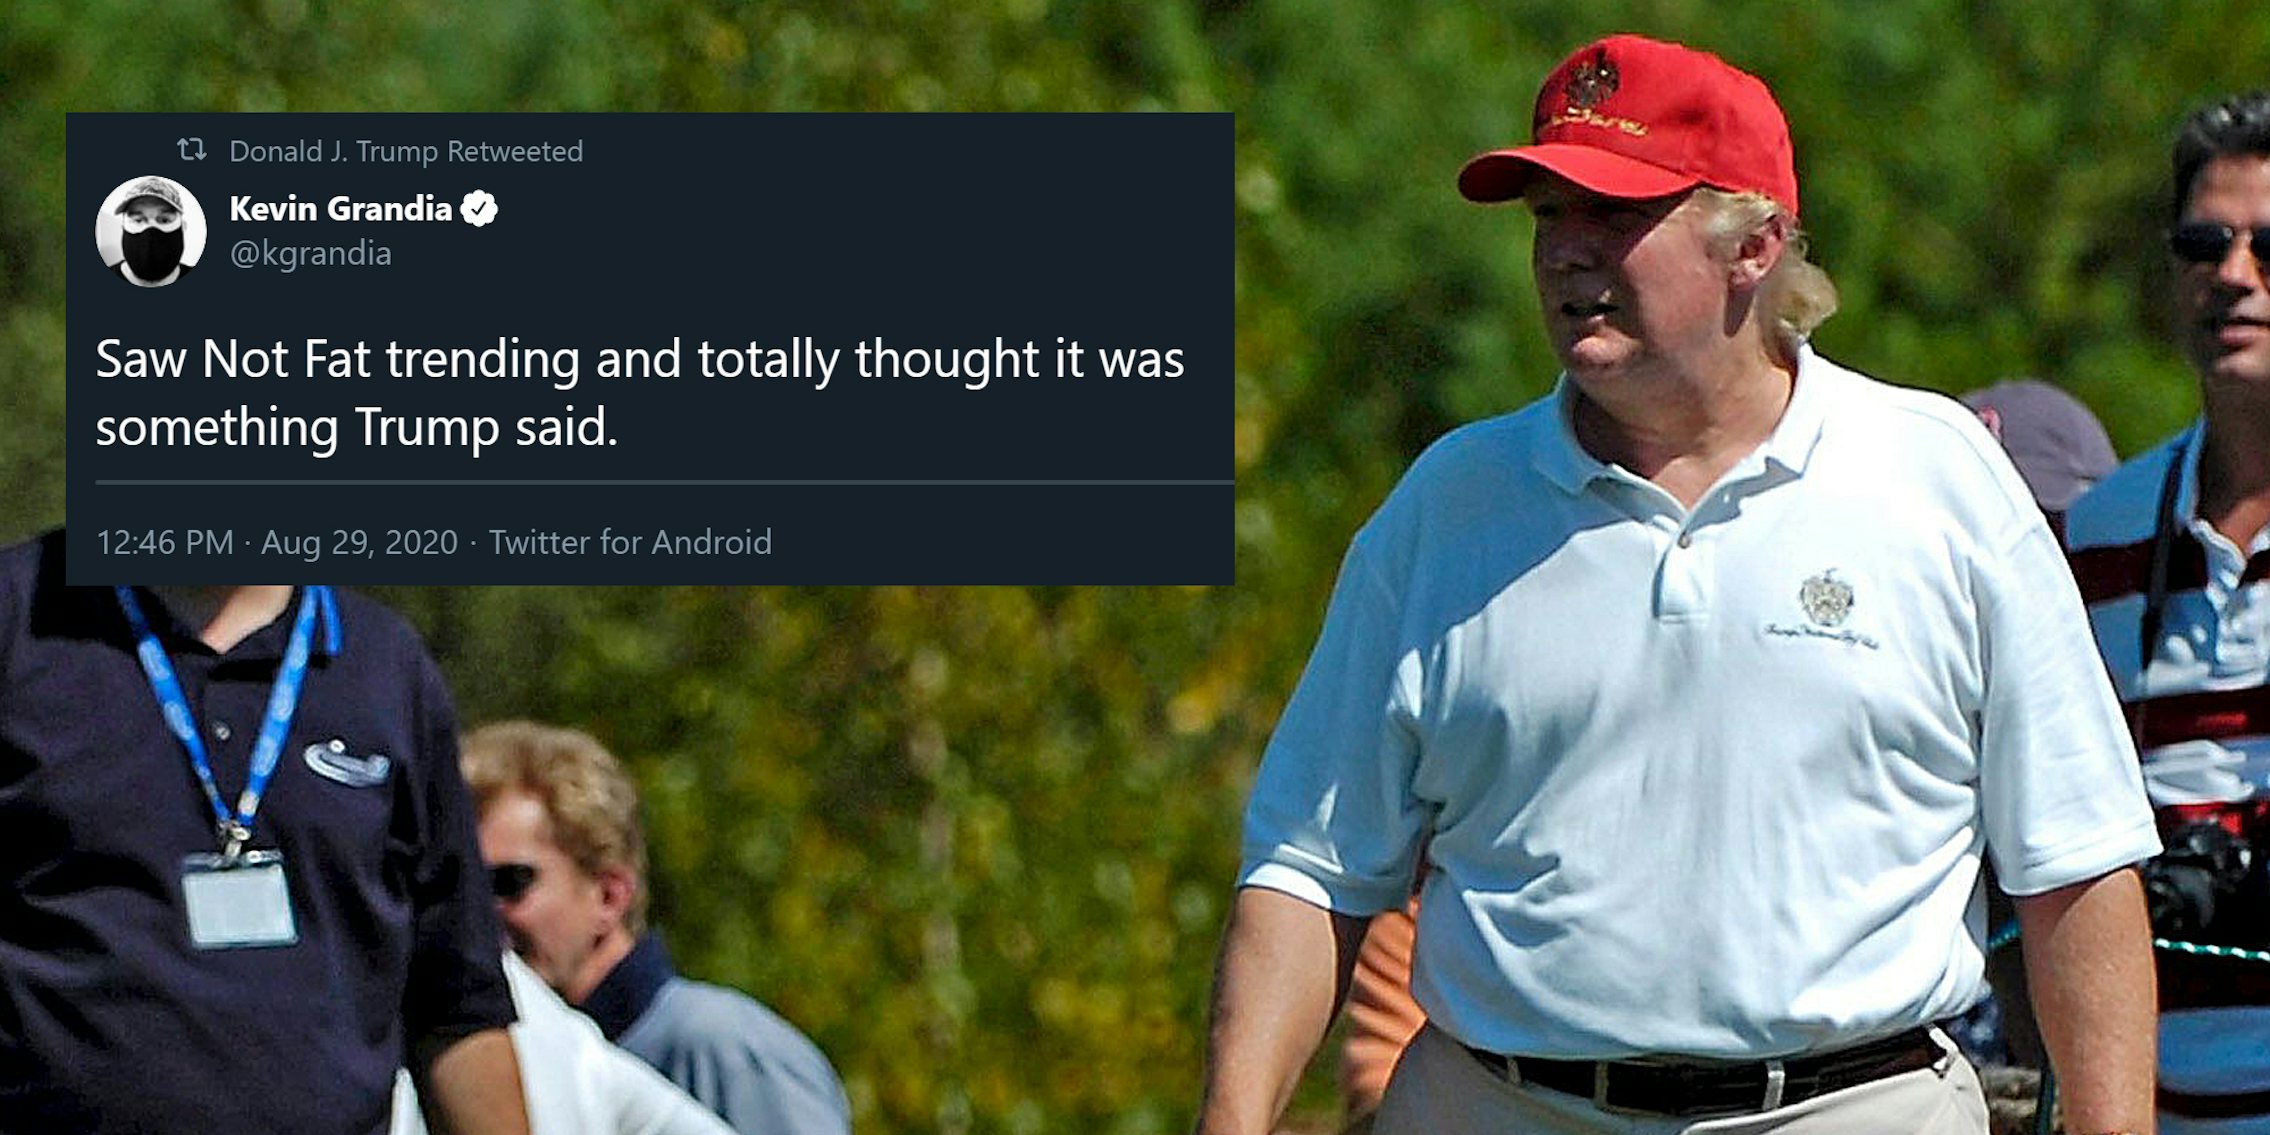 Donald Trump golfing with 'Saw Not Fat trending and totally thought it was something Trump said.' tweet